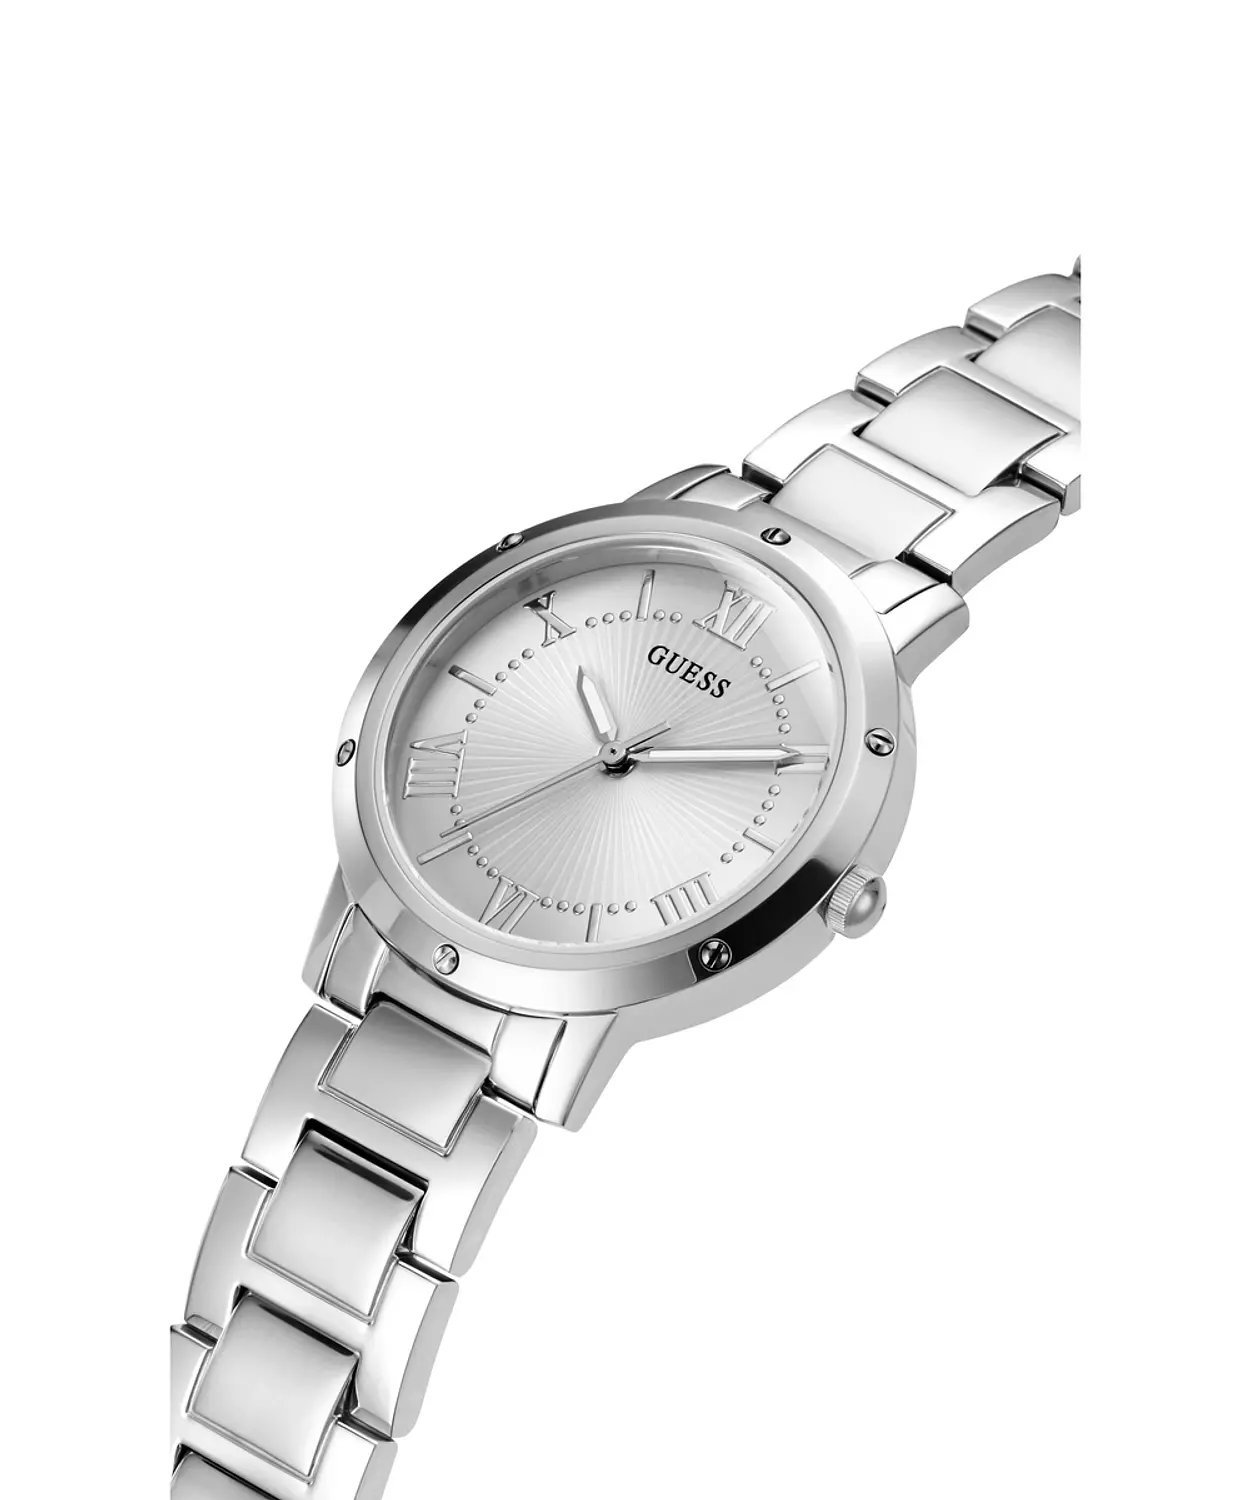 GUESS GW0404L1 ANALOG WATCH  For Women Silver Stainless Steel Polished Bracelet  7